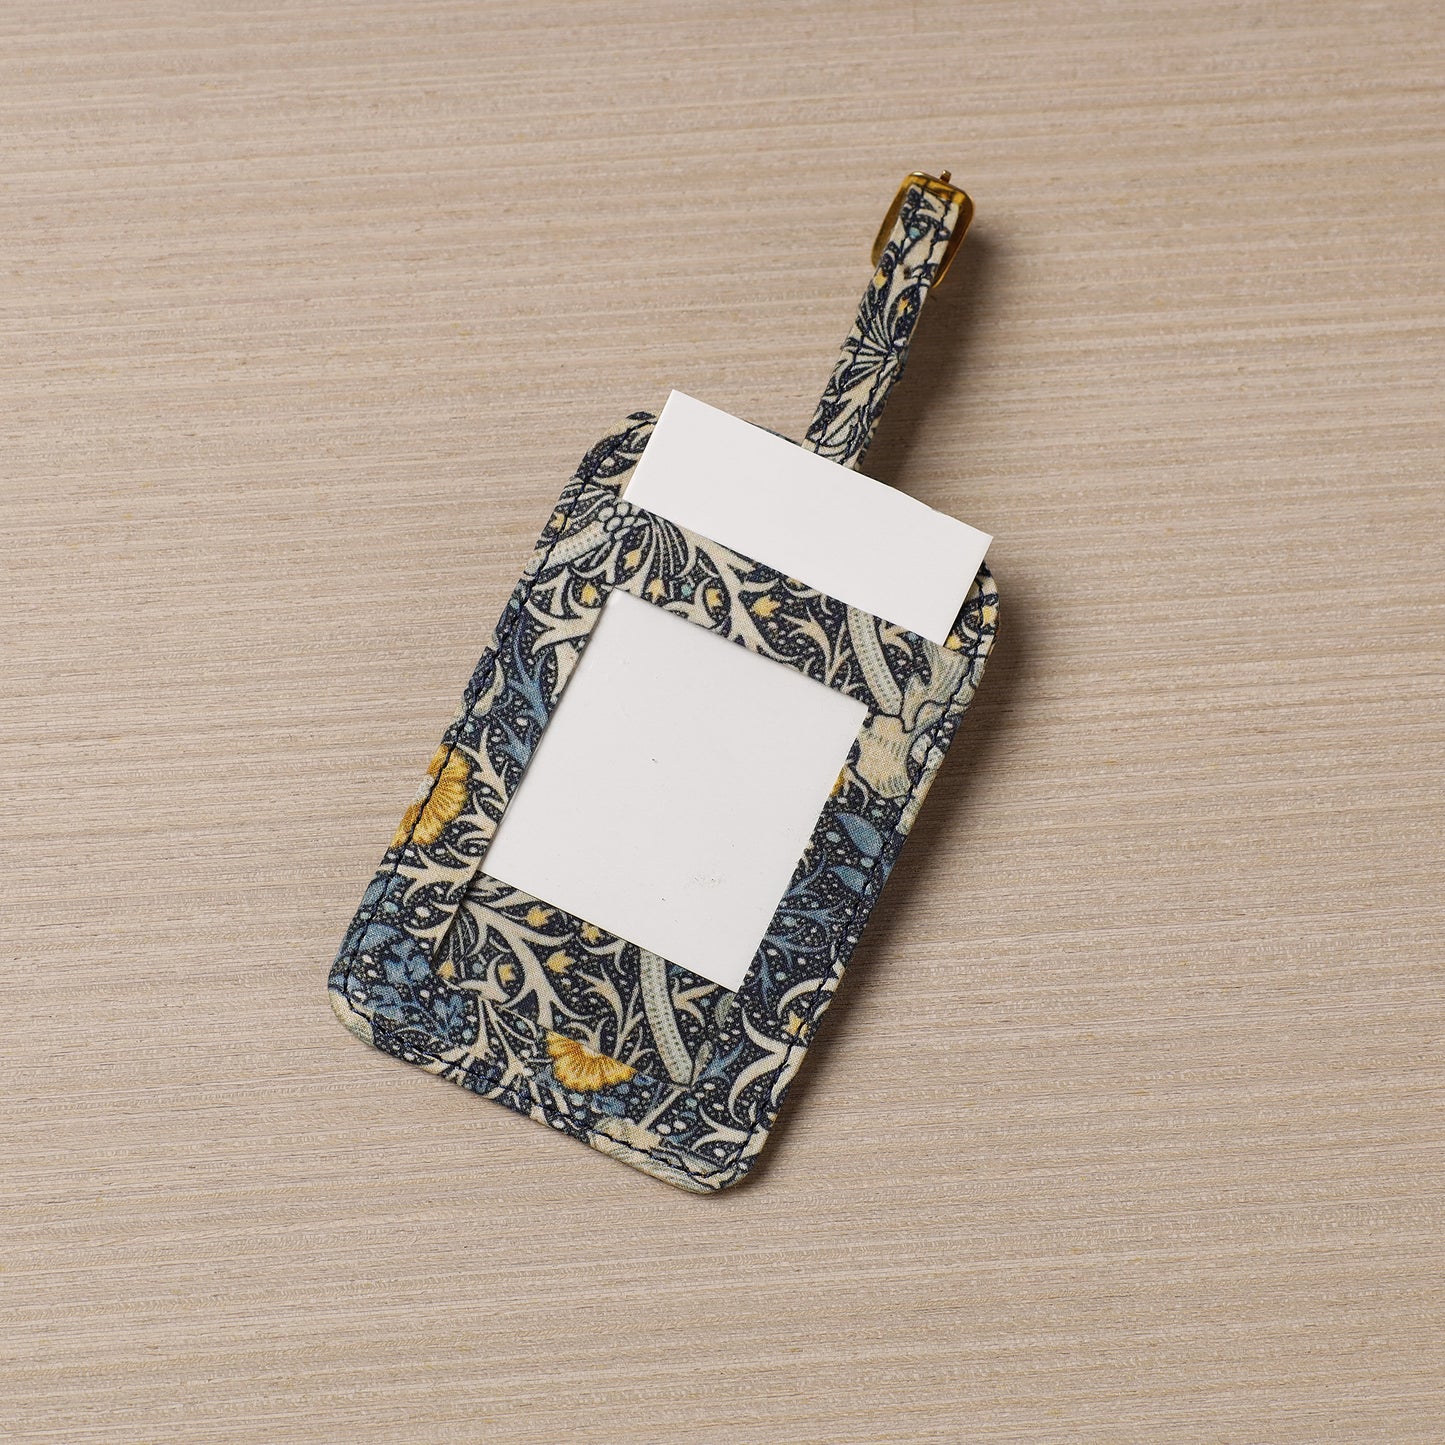 Floral Printed Handcrafted Luggage Tag (4 x 3 in)